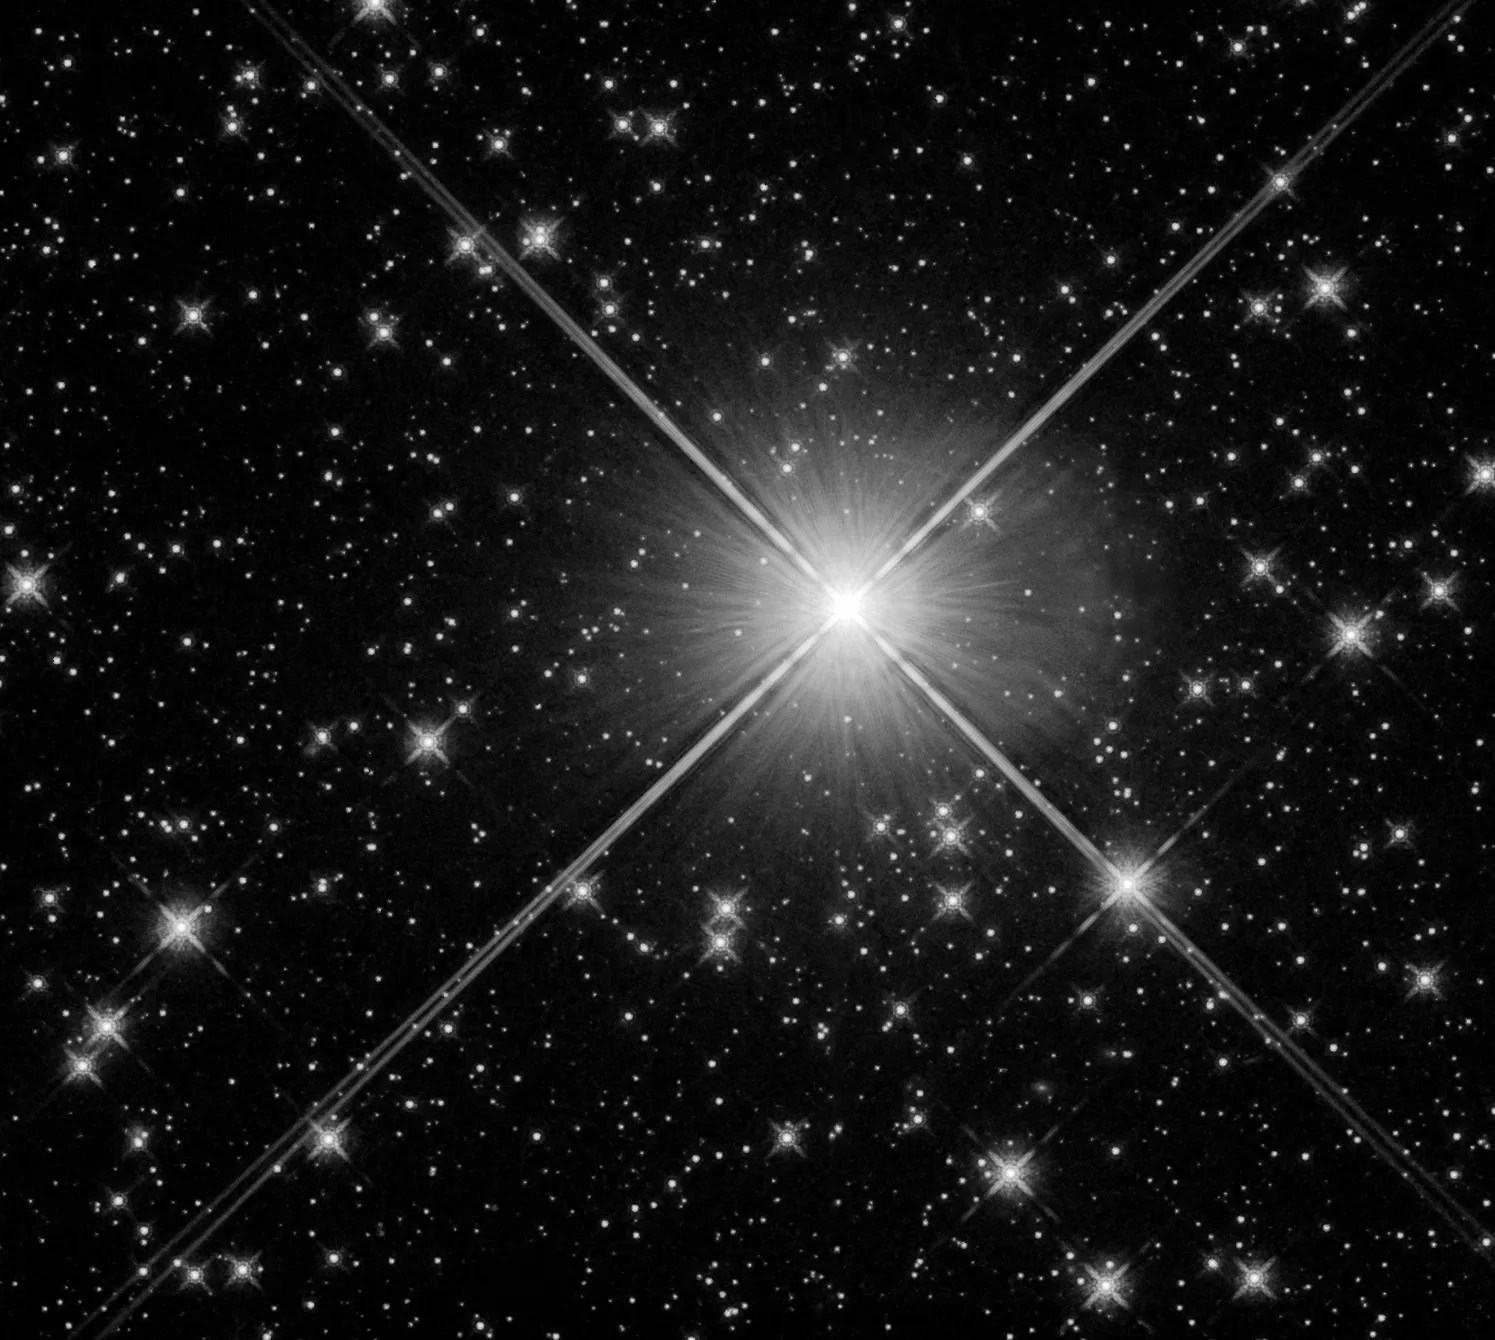 This black and white image is dominated by a single large, bright star with x-shaped beams of light emanating from it across the image. Other, smaller stars are visible around it.